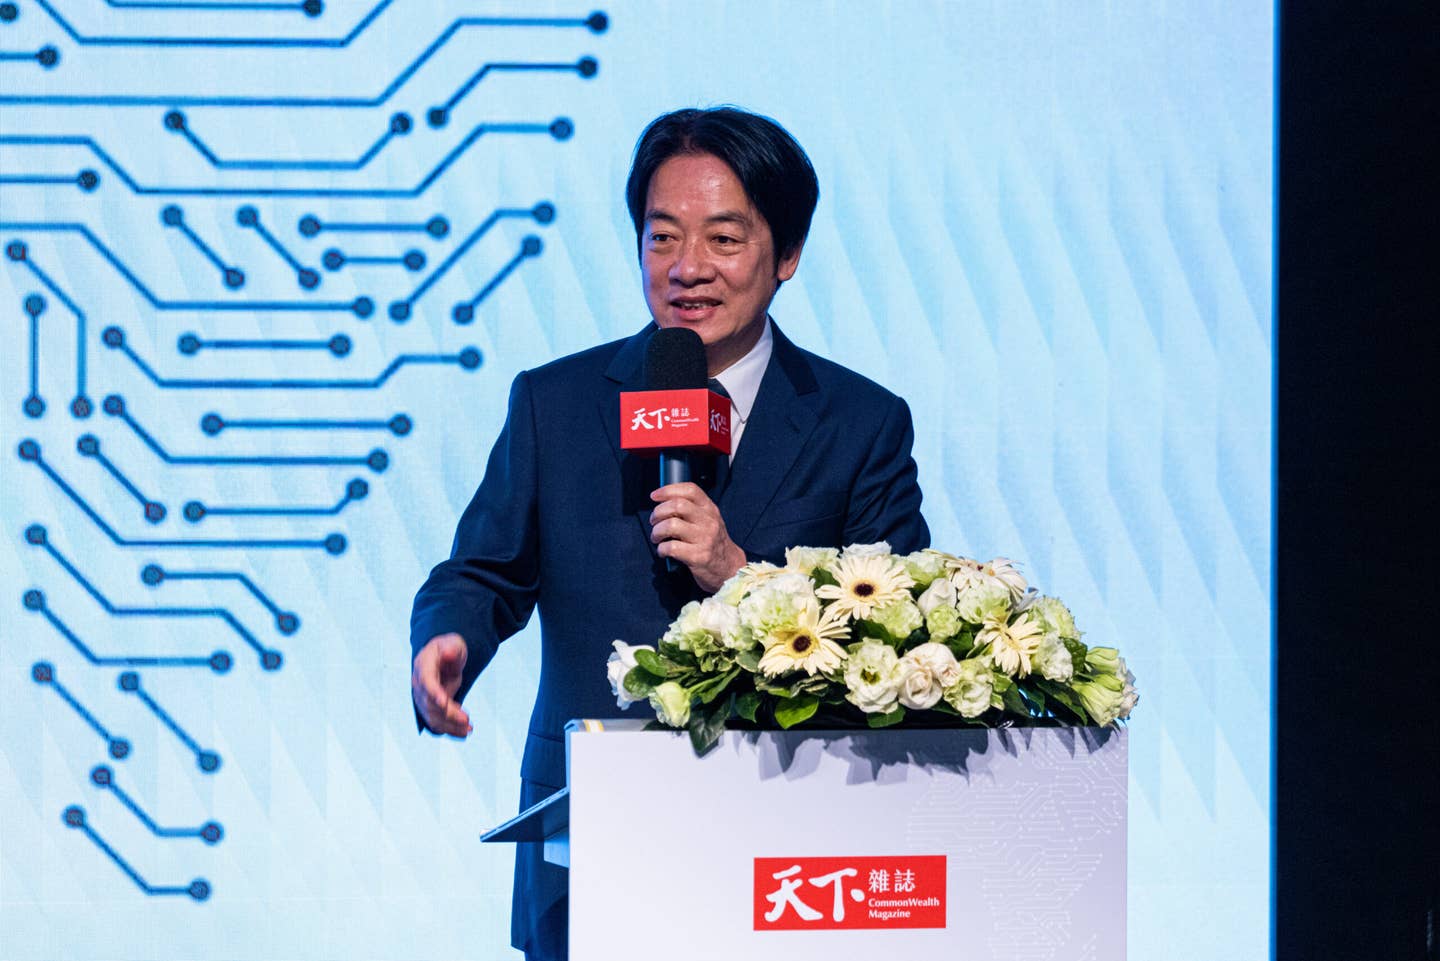 Taiwanese Vice President Lai Ching-te gives a speech on March 16, 2023, in Taipei, Taiwan. <em>Photo by Annabelle Chih/Getty Images</em>